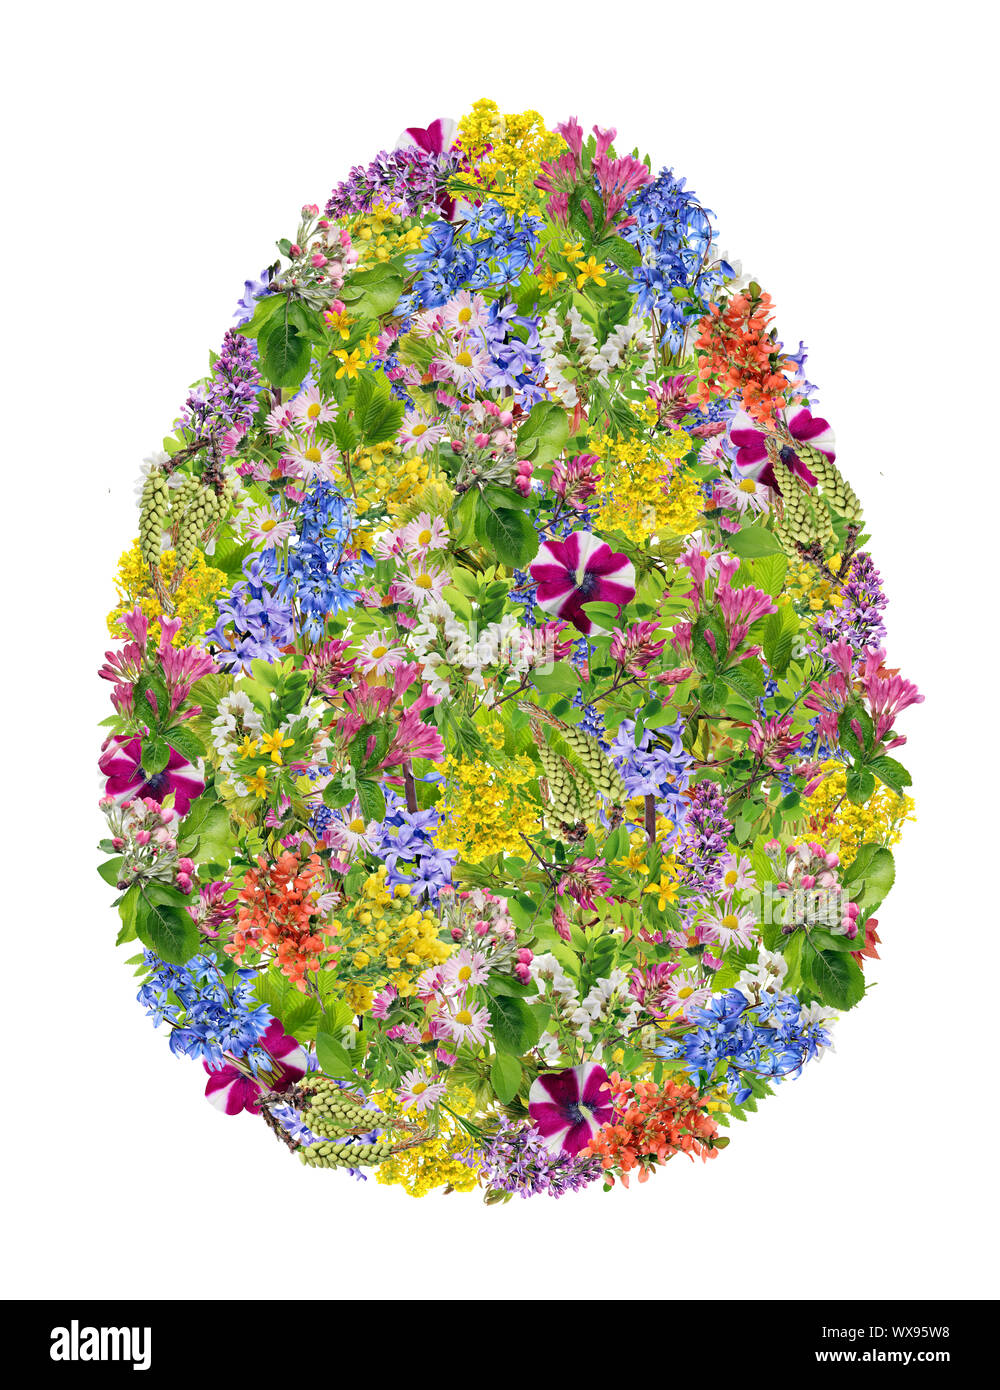 Easter egg made from spring European flowers and plants Stock Photo